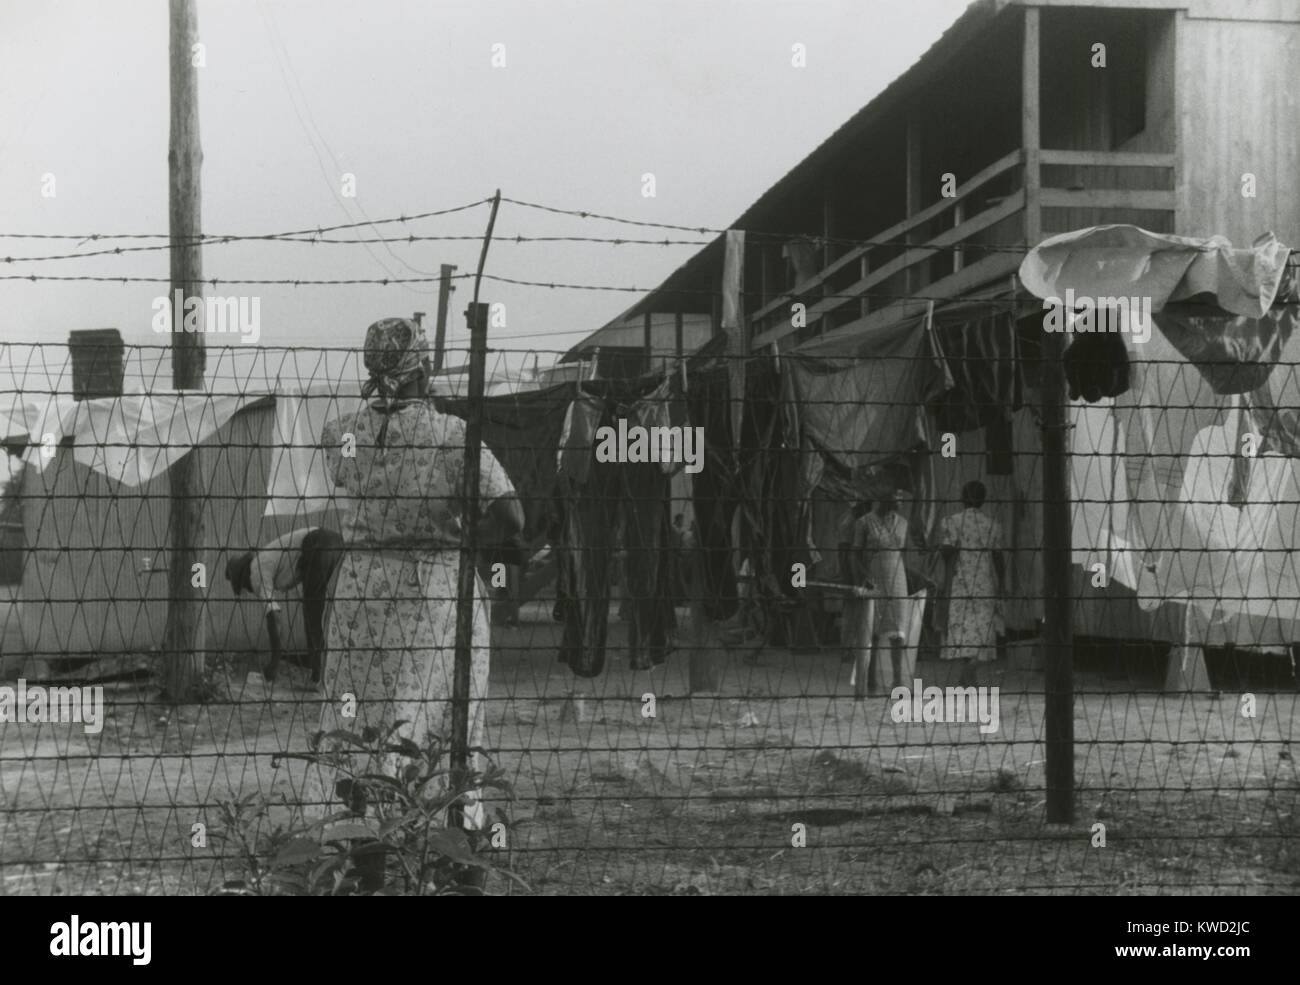 Migratory African American cannery workers camp surrounded by a barbed-wire fence. The camp was the factory of the Cannon Canning Company of Bridgeville, Delaware. July 1940 photo by John Delano  (BSLOC 2017 20 93) Stock Photo